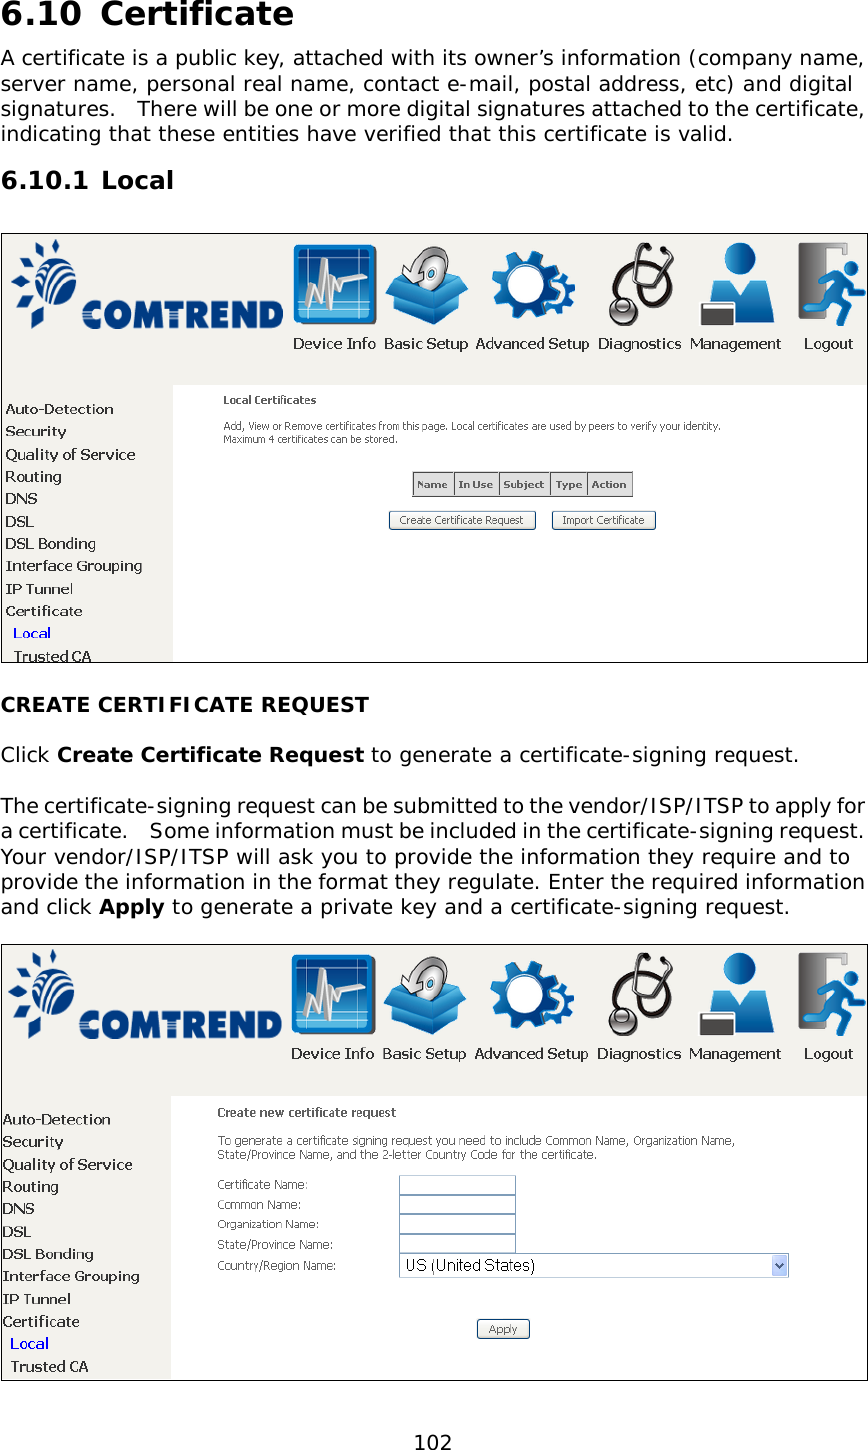  102    6.10 Certificate A certificate is a public key, attached with its owner’s information (company name, server name, personal real name, contact e-mail, postal address, etc) and digital signatures.   There will be one or more digital signatures attached to the certificate, indicating that these entities have verified that this certificate is valid. 6.10.1 Local  CREATE CERTIFICATE REQUEST  Click Create Certificate Request to generate a certificate-signing request.   The certificate-signing request can be submitted to the vendor/ISP/ITSP to apply for a certificate.    Some information must be included in the certificate-signing request.   Your vendor/ISP/ITSP will ask you to provide the information they require and to provide the information in the format they regulate. Enter the required information and click Apply to generate a private key and a certificate-signing request.      